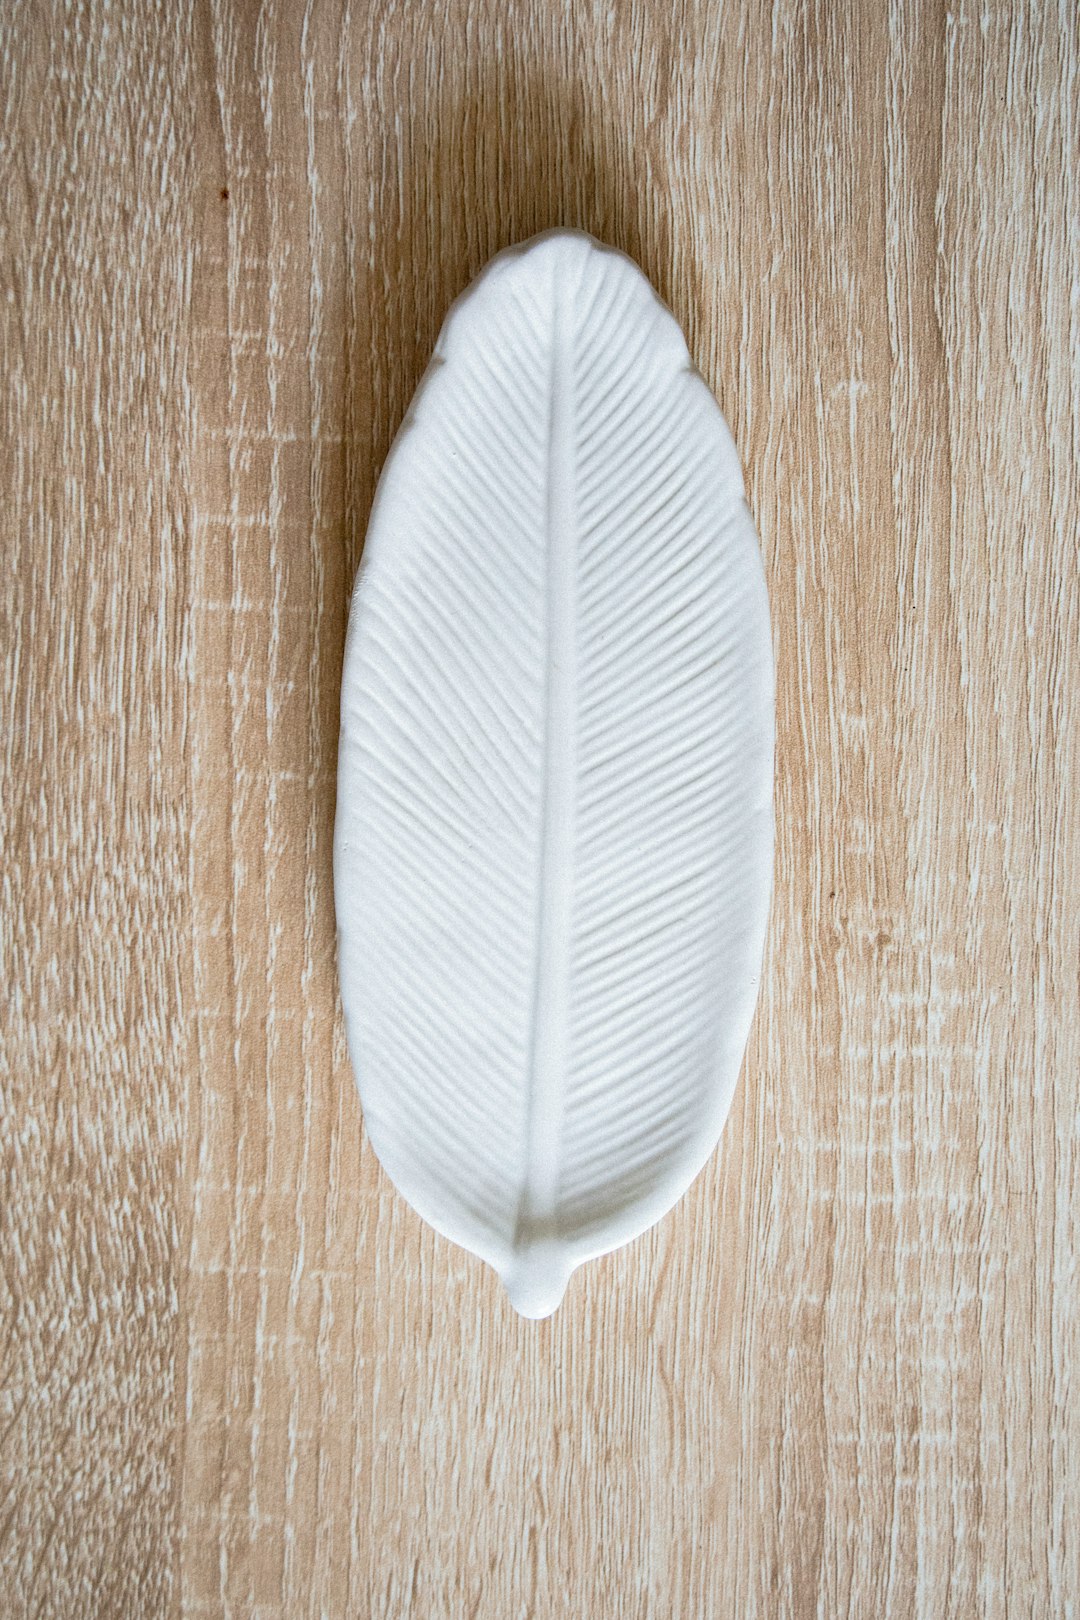 white feather on brown wooden table